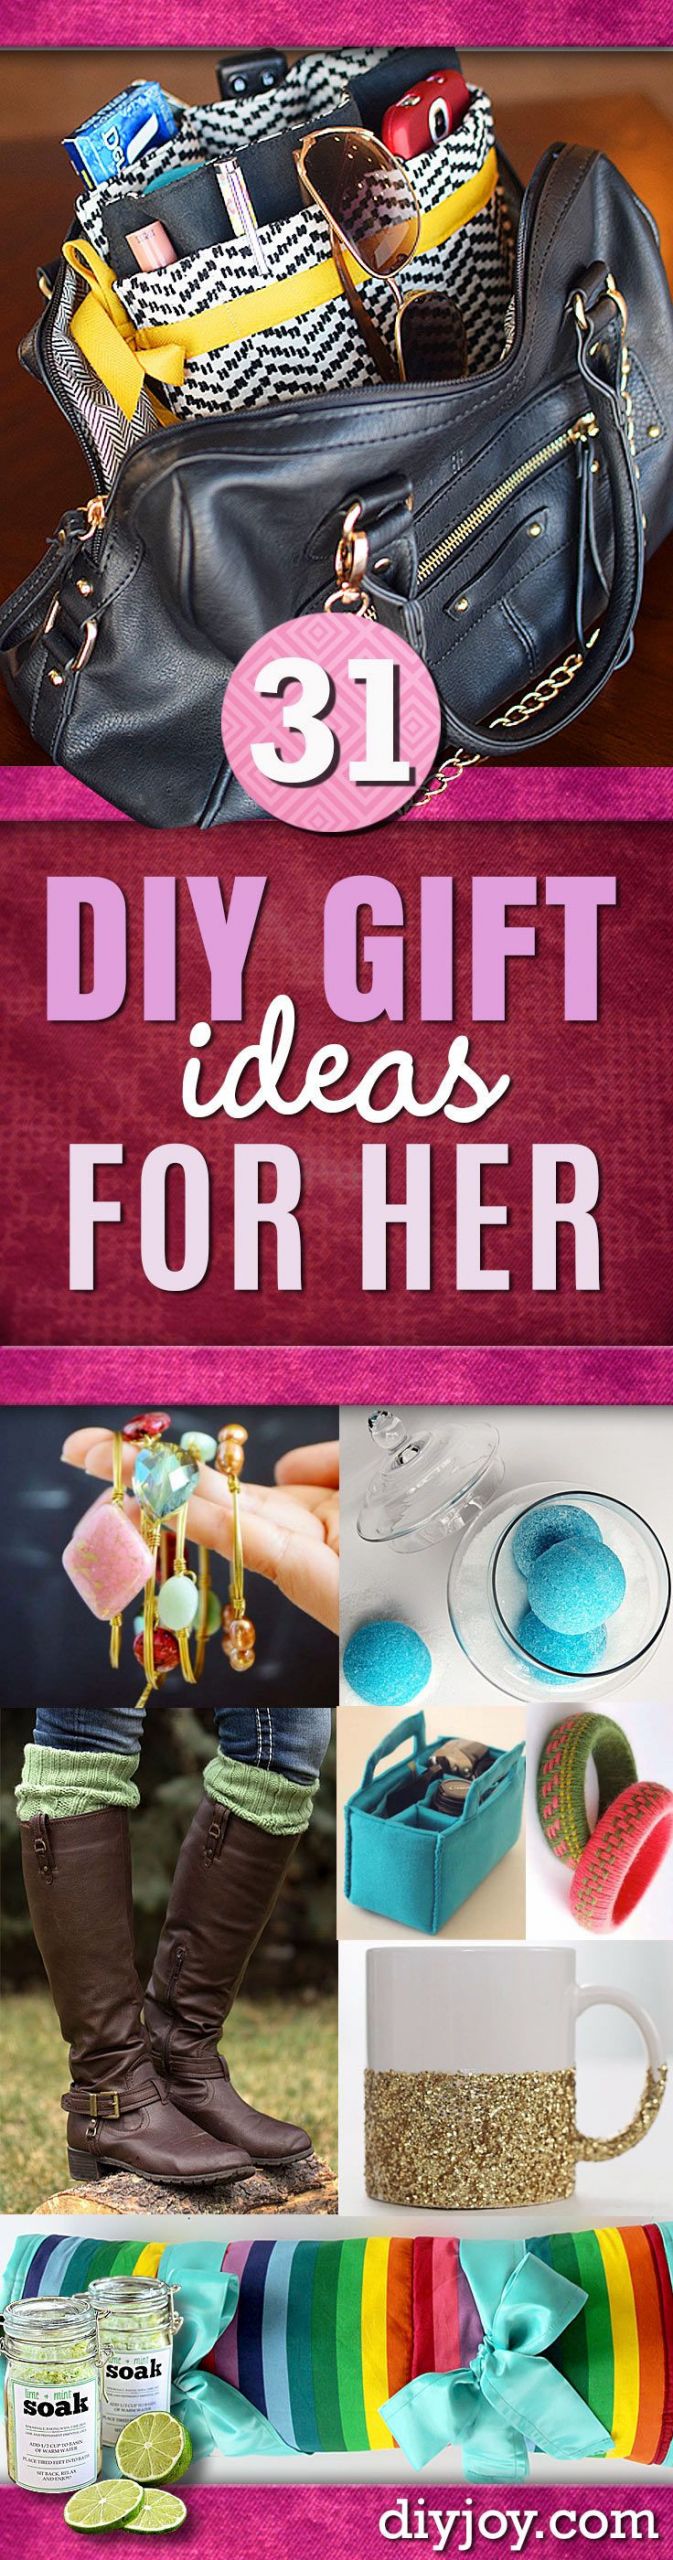 Cool Gift Ideas For Girlfriend
 DIY Gift Ideas for Her